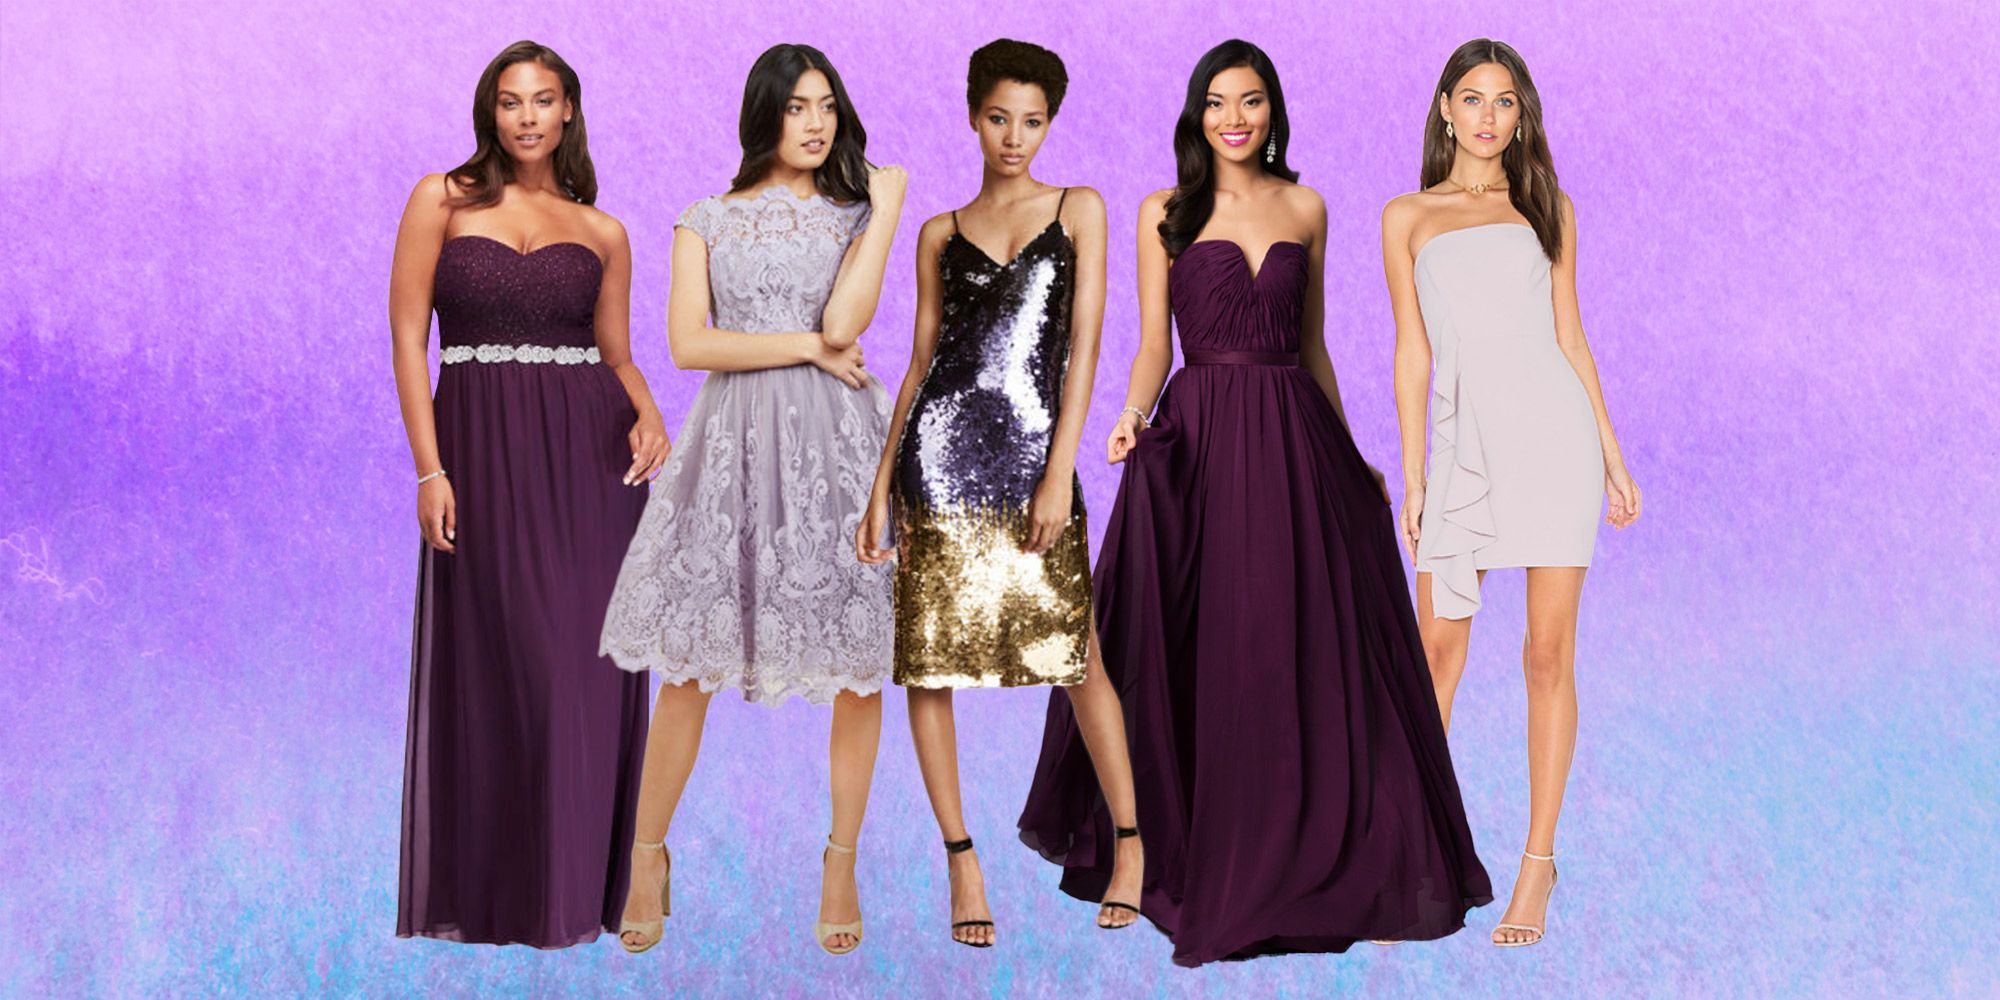 Pretty Purple Prom Dresses of 2018 in Every Shade From Lavender to Burgundy